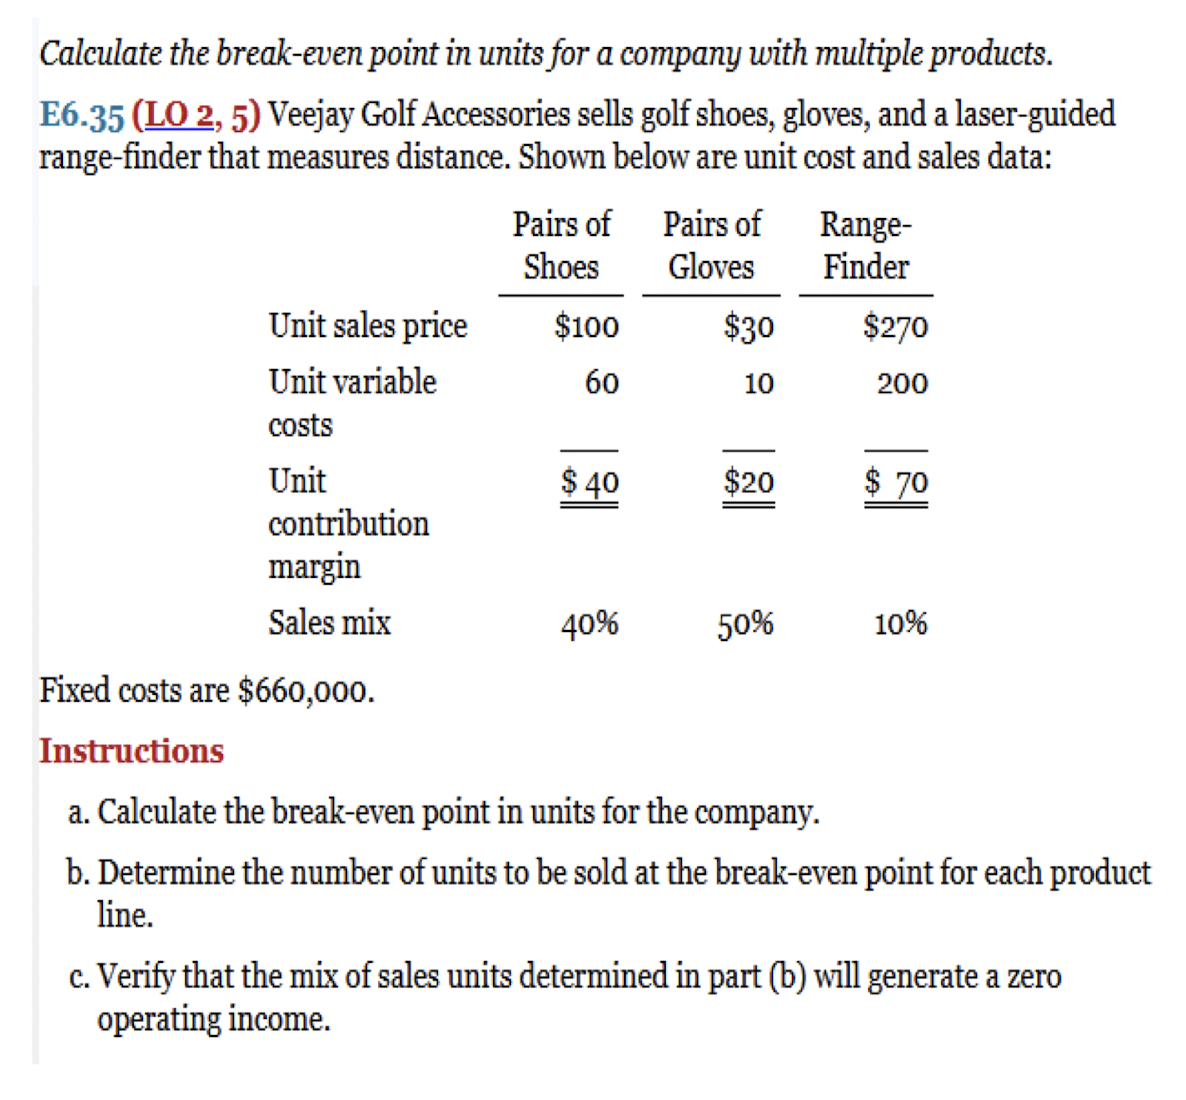 Calculate the break-even point in units for a company with multiple products.
E6.35 (LO 2, 5) Veejay Golf Accessories sells golf shoes, gloves, and a laser-guided
range-finder that measures distance. Shown below are unit cost and sales data:
Pairs of Pairs of
Range-
Shoes
Gloves
Finder
Unit sales price
$100
$270
Unit variable
60
200
costs
Unit
$40
$ 70
contribution
margin
Sales mix
40%
50%
10%
Fixed costs are $660,000.
Instructions
a. Calculate the break-even point in units for the company.
b. Determine the number of units to be sold at the break-even point for each product
line.
c. Verify that the mix of sales units determined in part (b) will generate a zero
operating income.
$30
10
$20